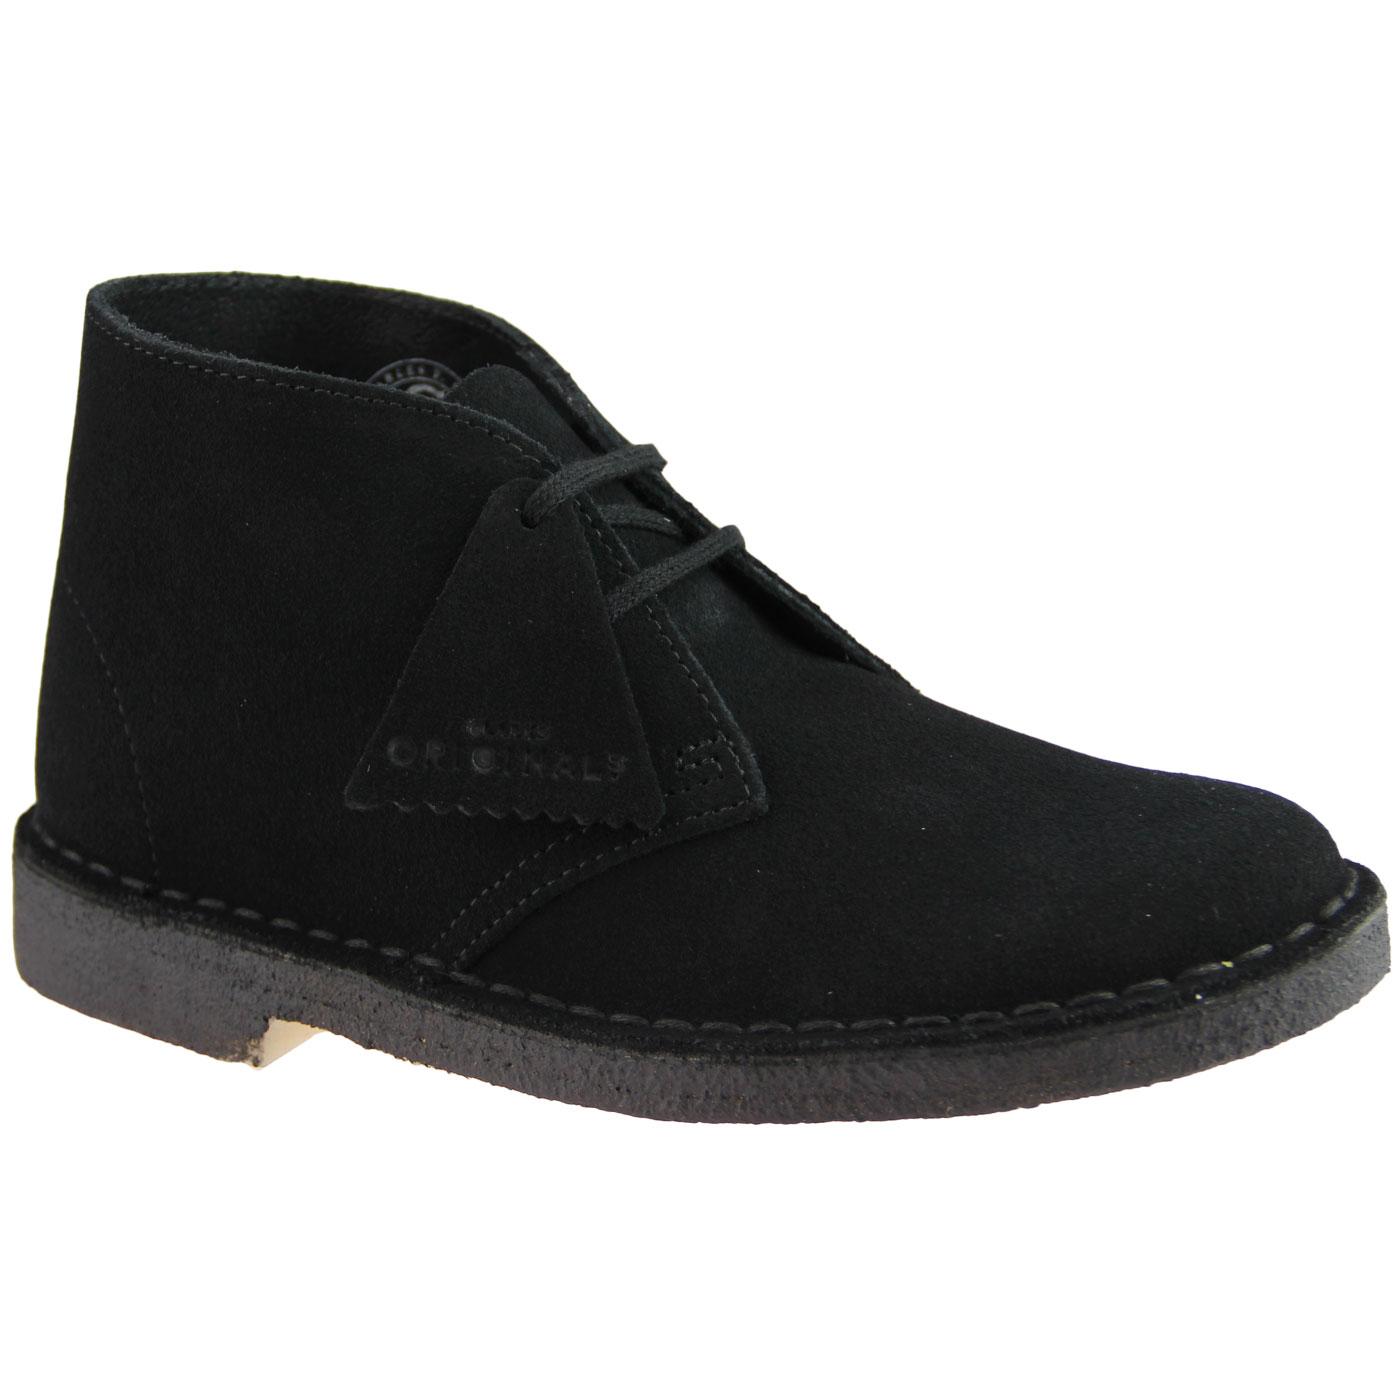 clarks boots black friday